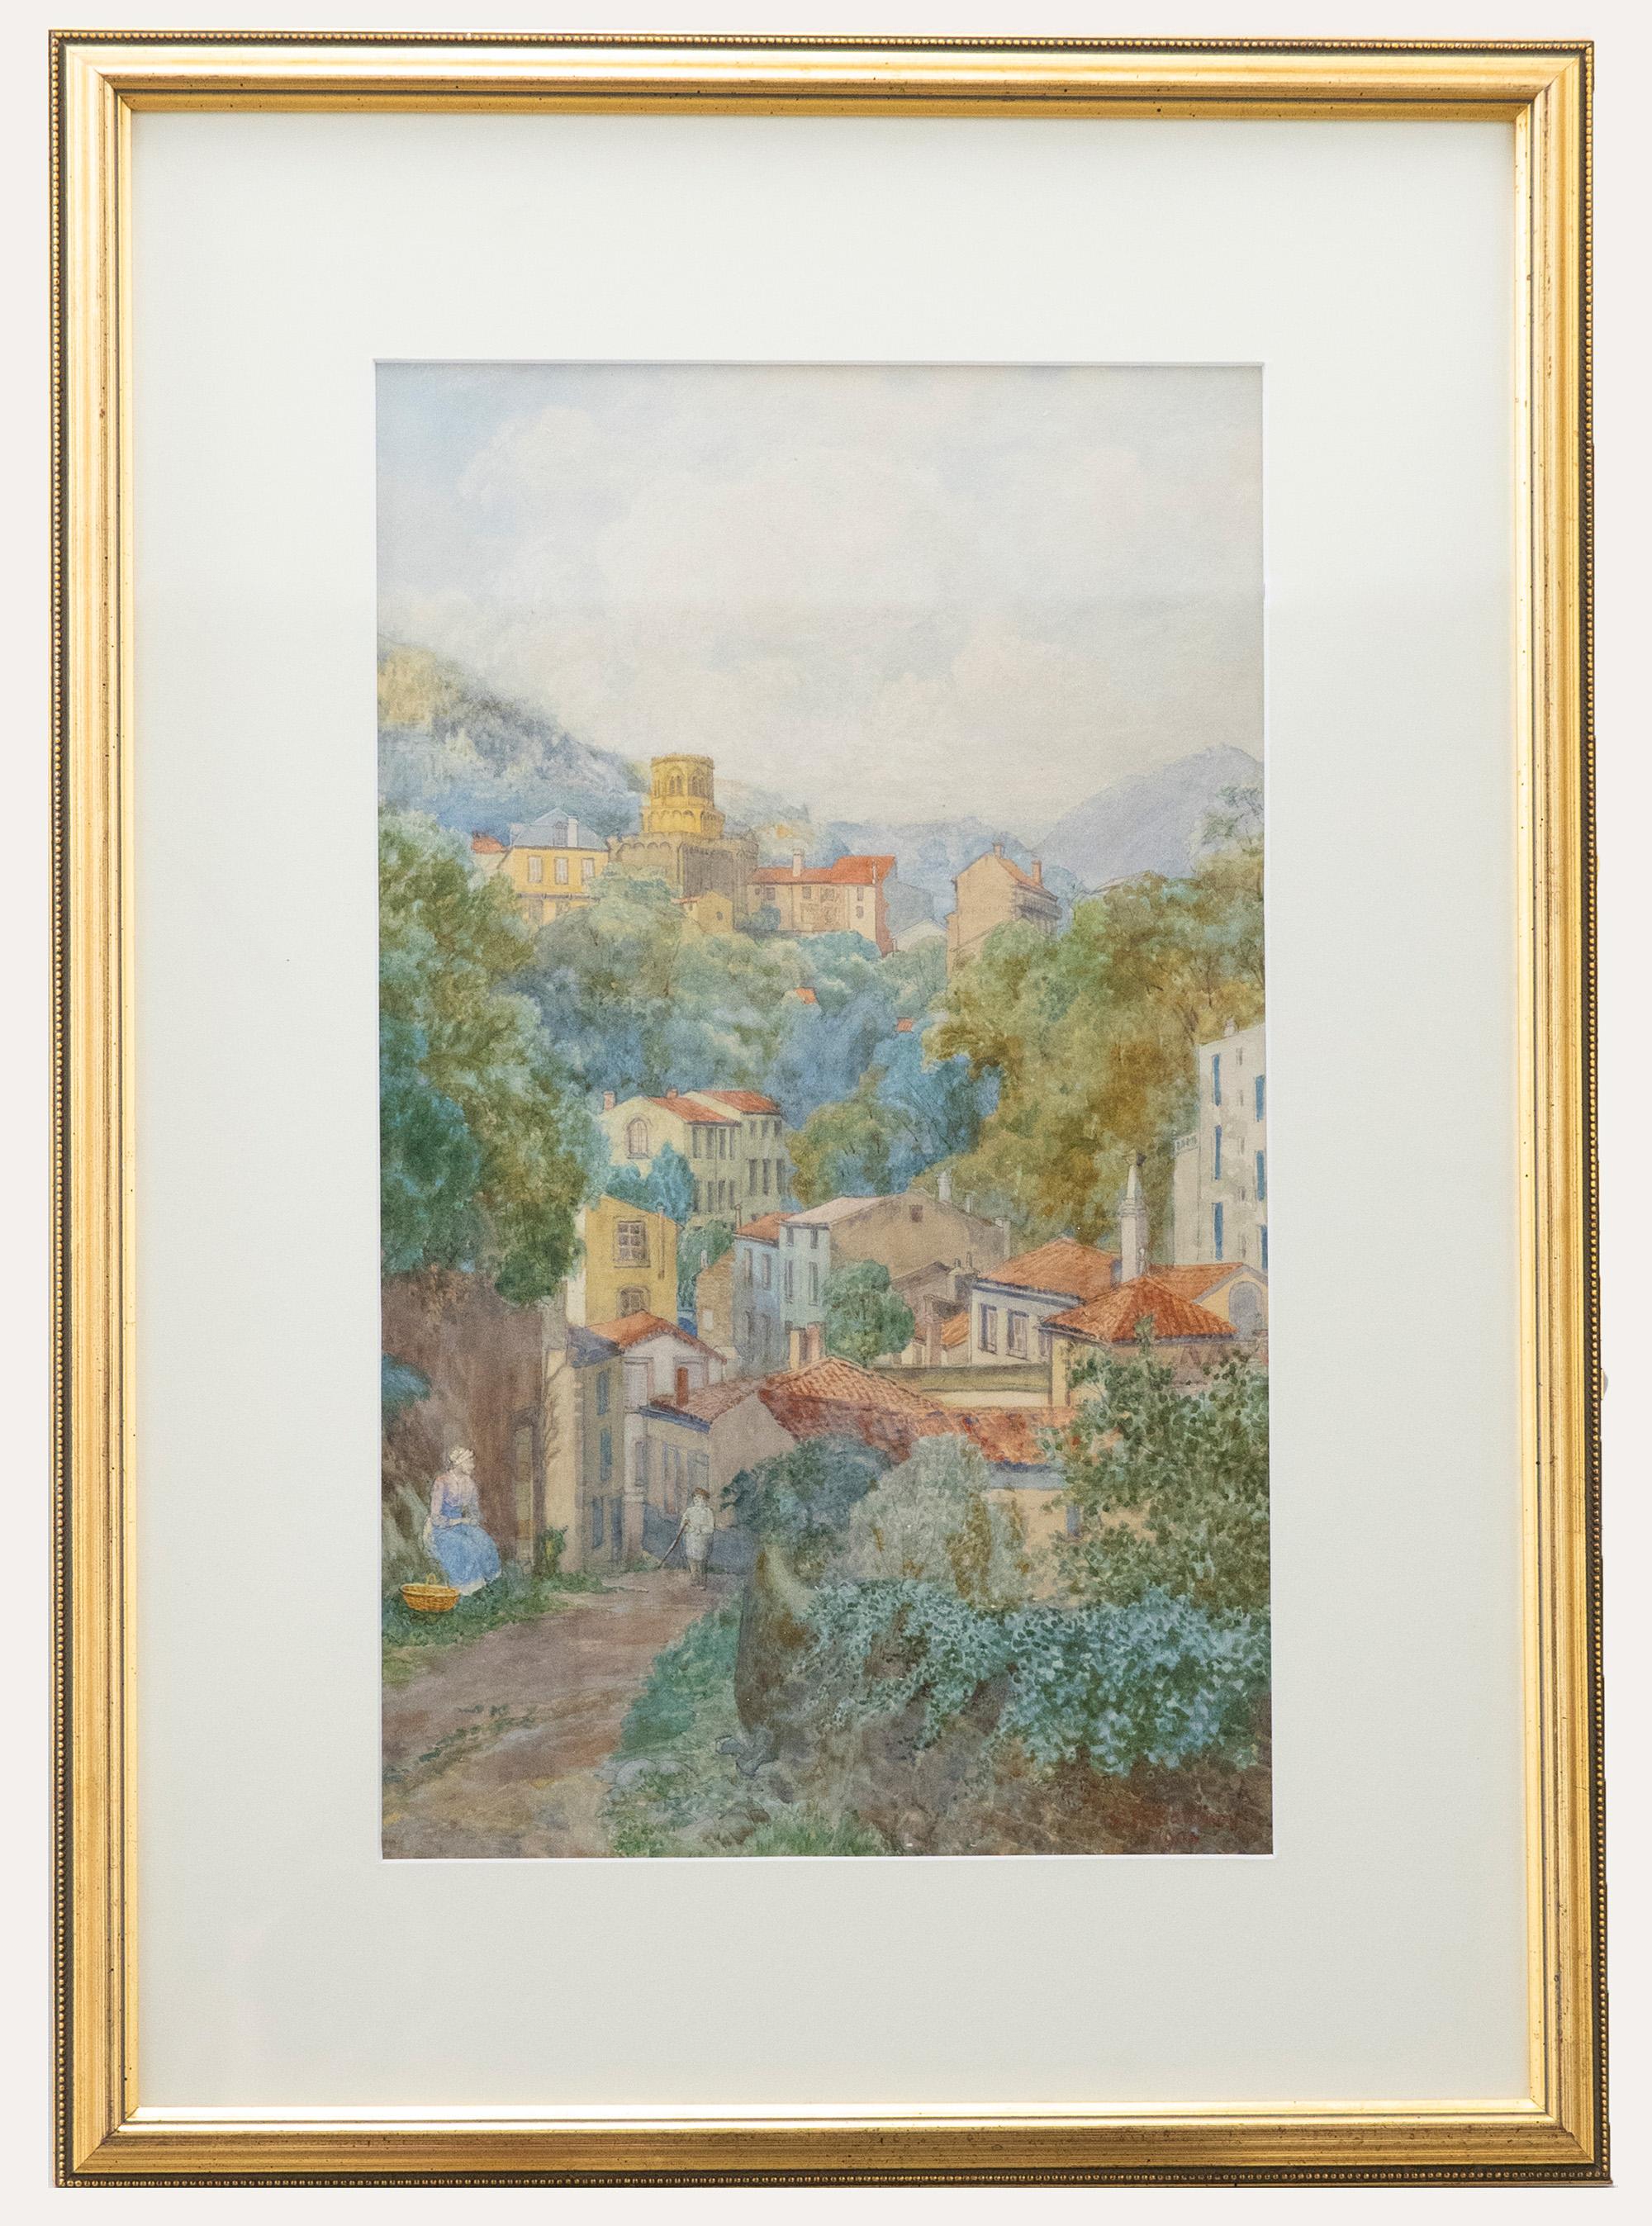 Unknown Landscape Art - Samuel Henry Baldrey - 1904 Watercolour, View of the Continental Town